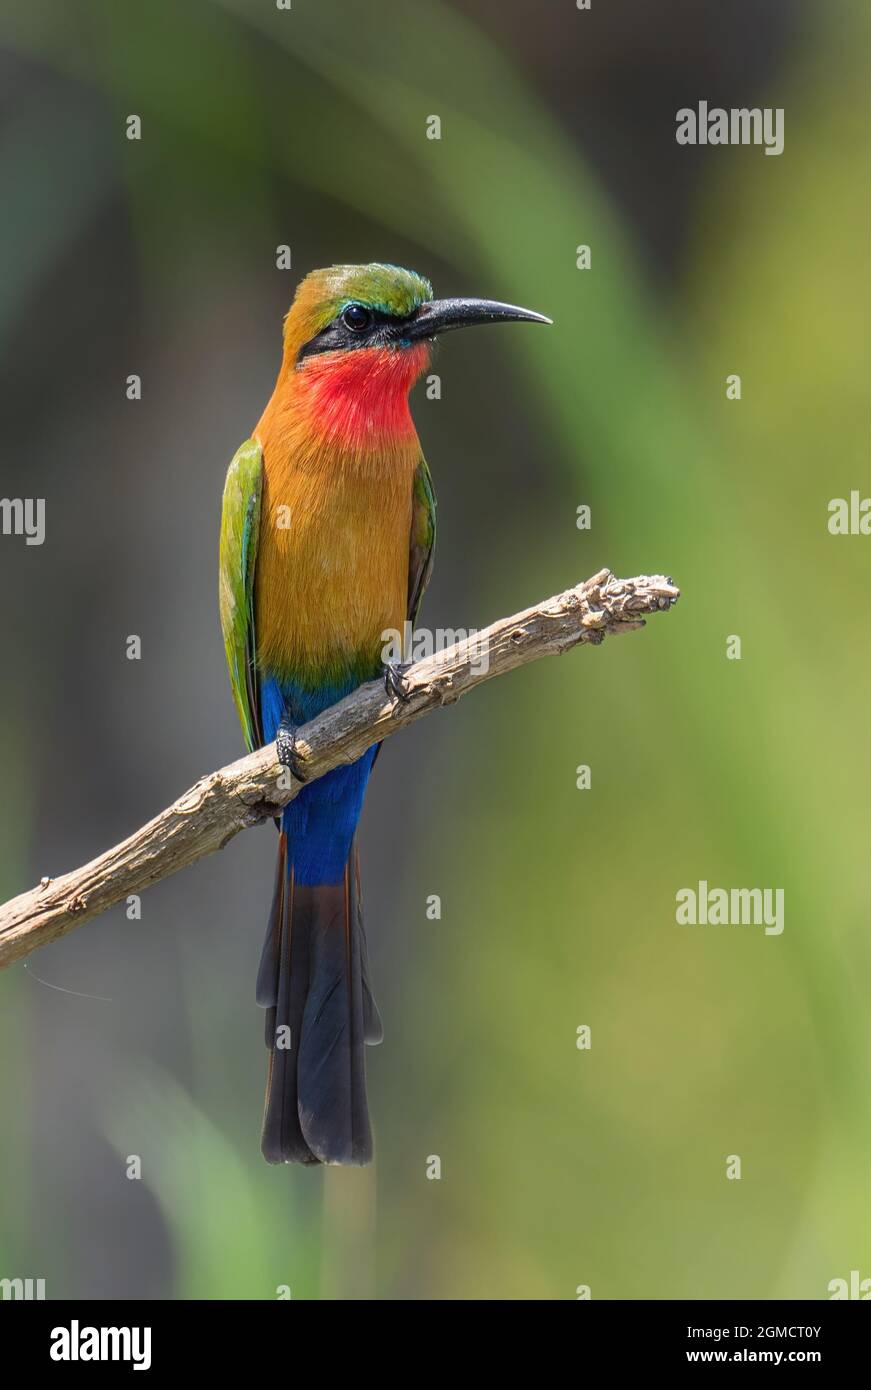 Red-throated Bee-eater - Merops bulocki, beautiful colored bird from African lakes and rivers, Murchison falls, Uganda. Stock Photo